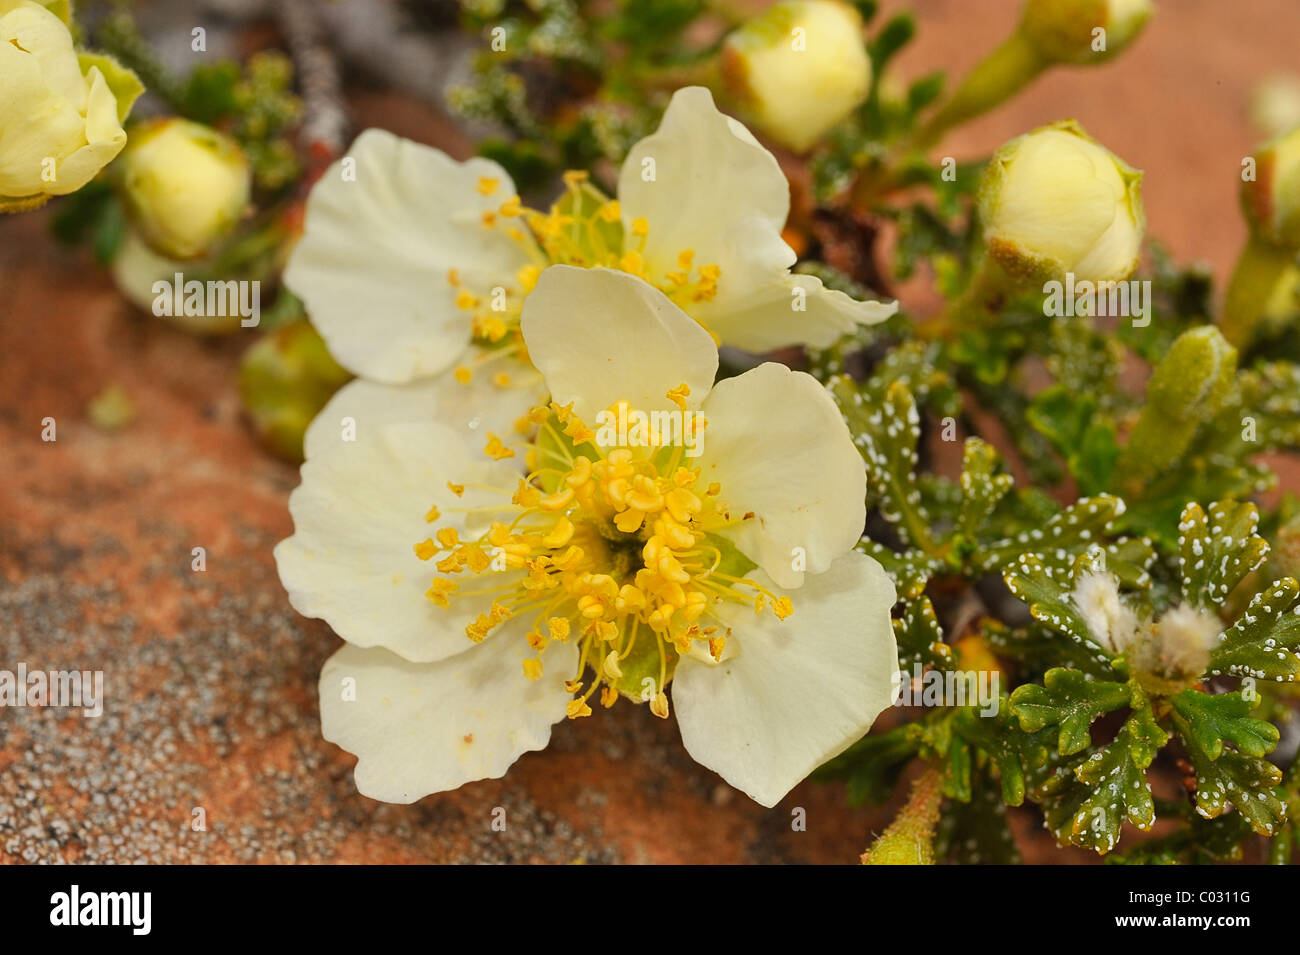 Sego lily flowers growing in Canyonlands National Park, Utah, USA Banque D'Images